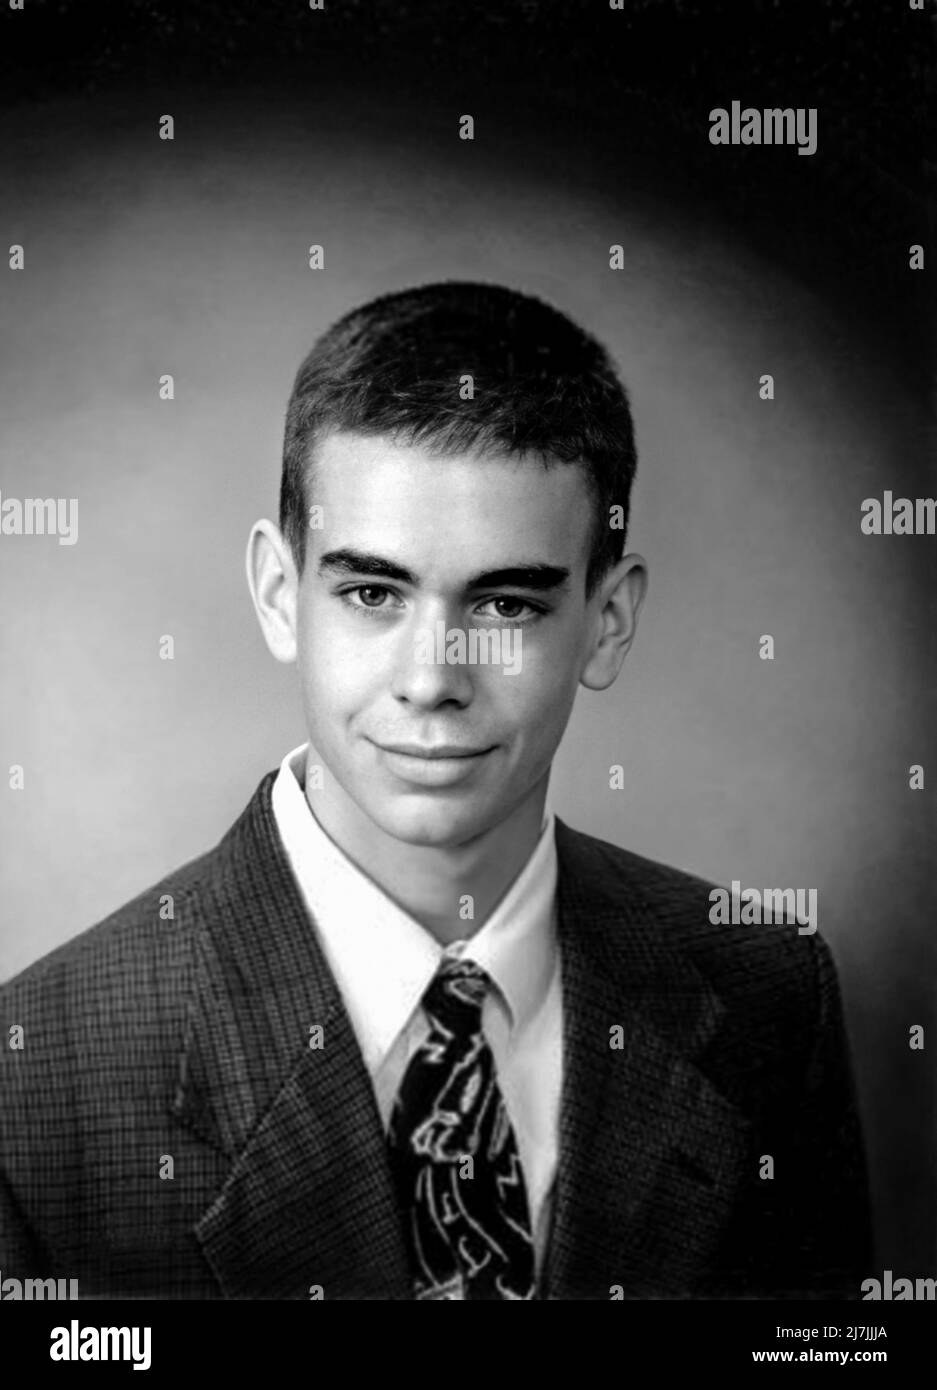 1993 ca , USA : The programmer and philanthropist JACK Patrick DORSEY ( born 19 november 1976 ) when was a young aged 17 . American business INTERNET entrepreneur magnate , investor and media Web proprietor co-founder of  TWITTER company . As well as the founder and principal executive officer of Block, Inc., a financial payments company . Unknown photographer .- INFORMATICA - INFORMATICO - INFORMATICS - COMPUTER TECHNOLOGY - INVENTORE - INVENTOR - HISTORY - FOTO STORICHE - TYCOON - personalità da bambino bambini da giovane - personality personalities when was young - INFANZIA - CHILDHOOD - TE Stock Photo